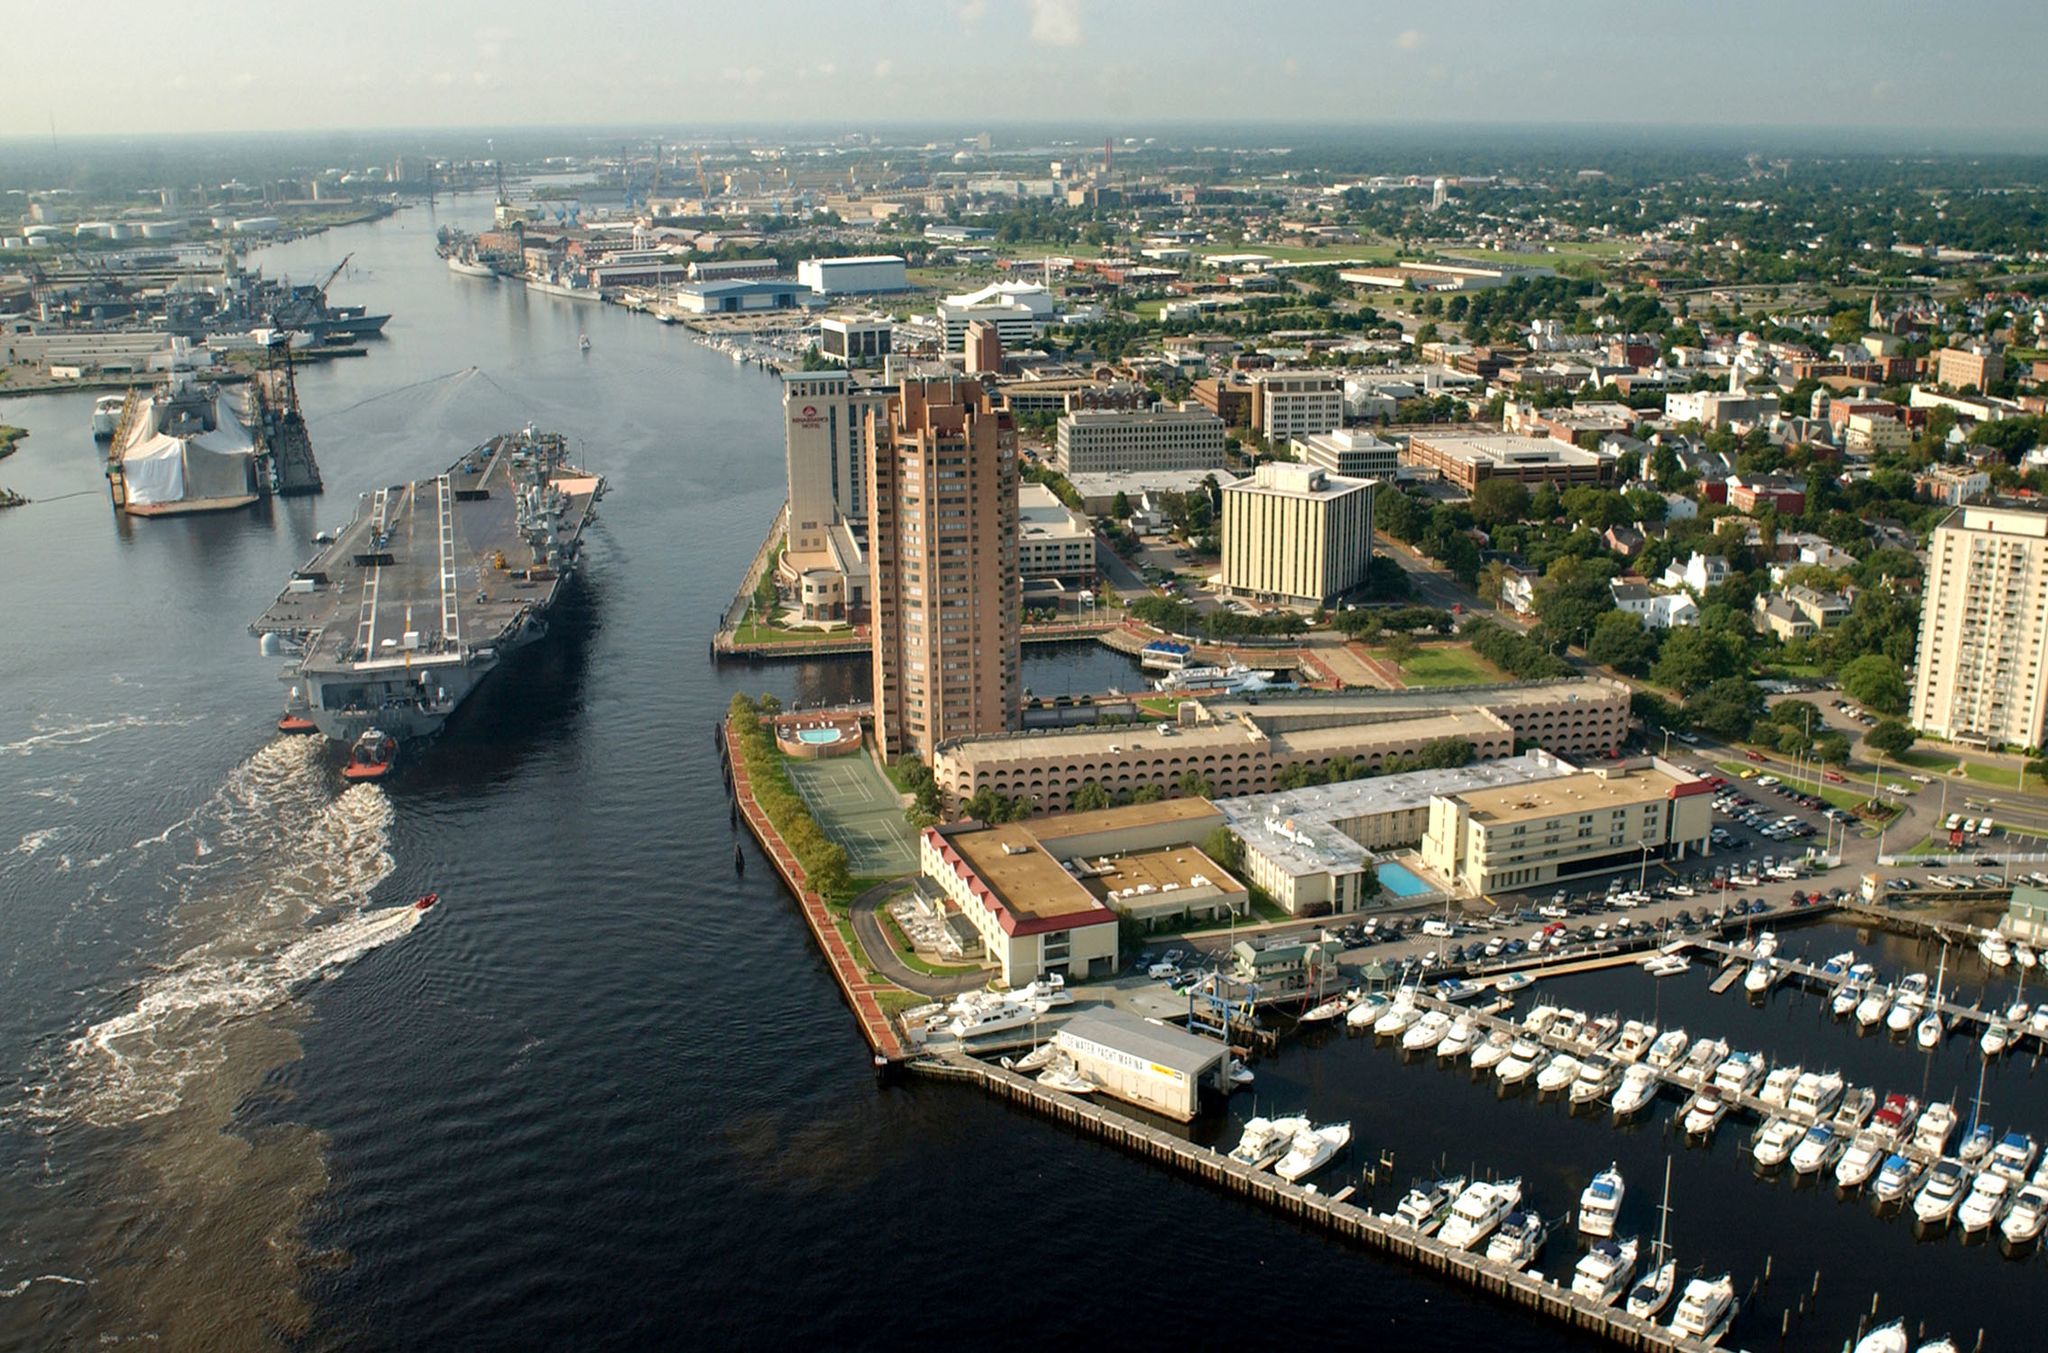 The Elizabeth River passes by Portsmouth, Virginia, before draining into the Chesapeake Bay. Portsmouth has one of the highest rates of sea level rise on the East Coast. Photo via Wikimedia Commons